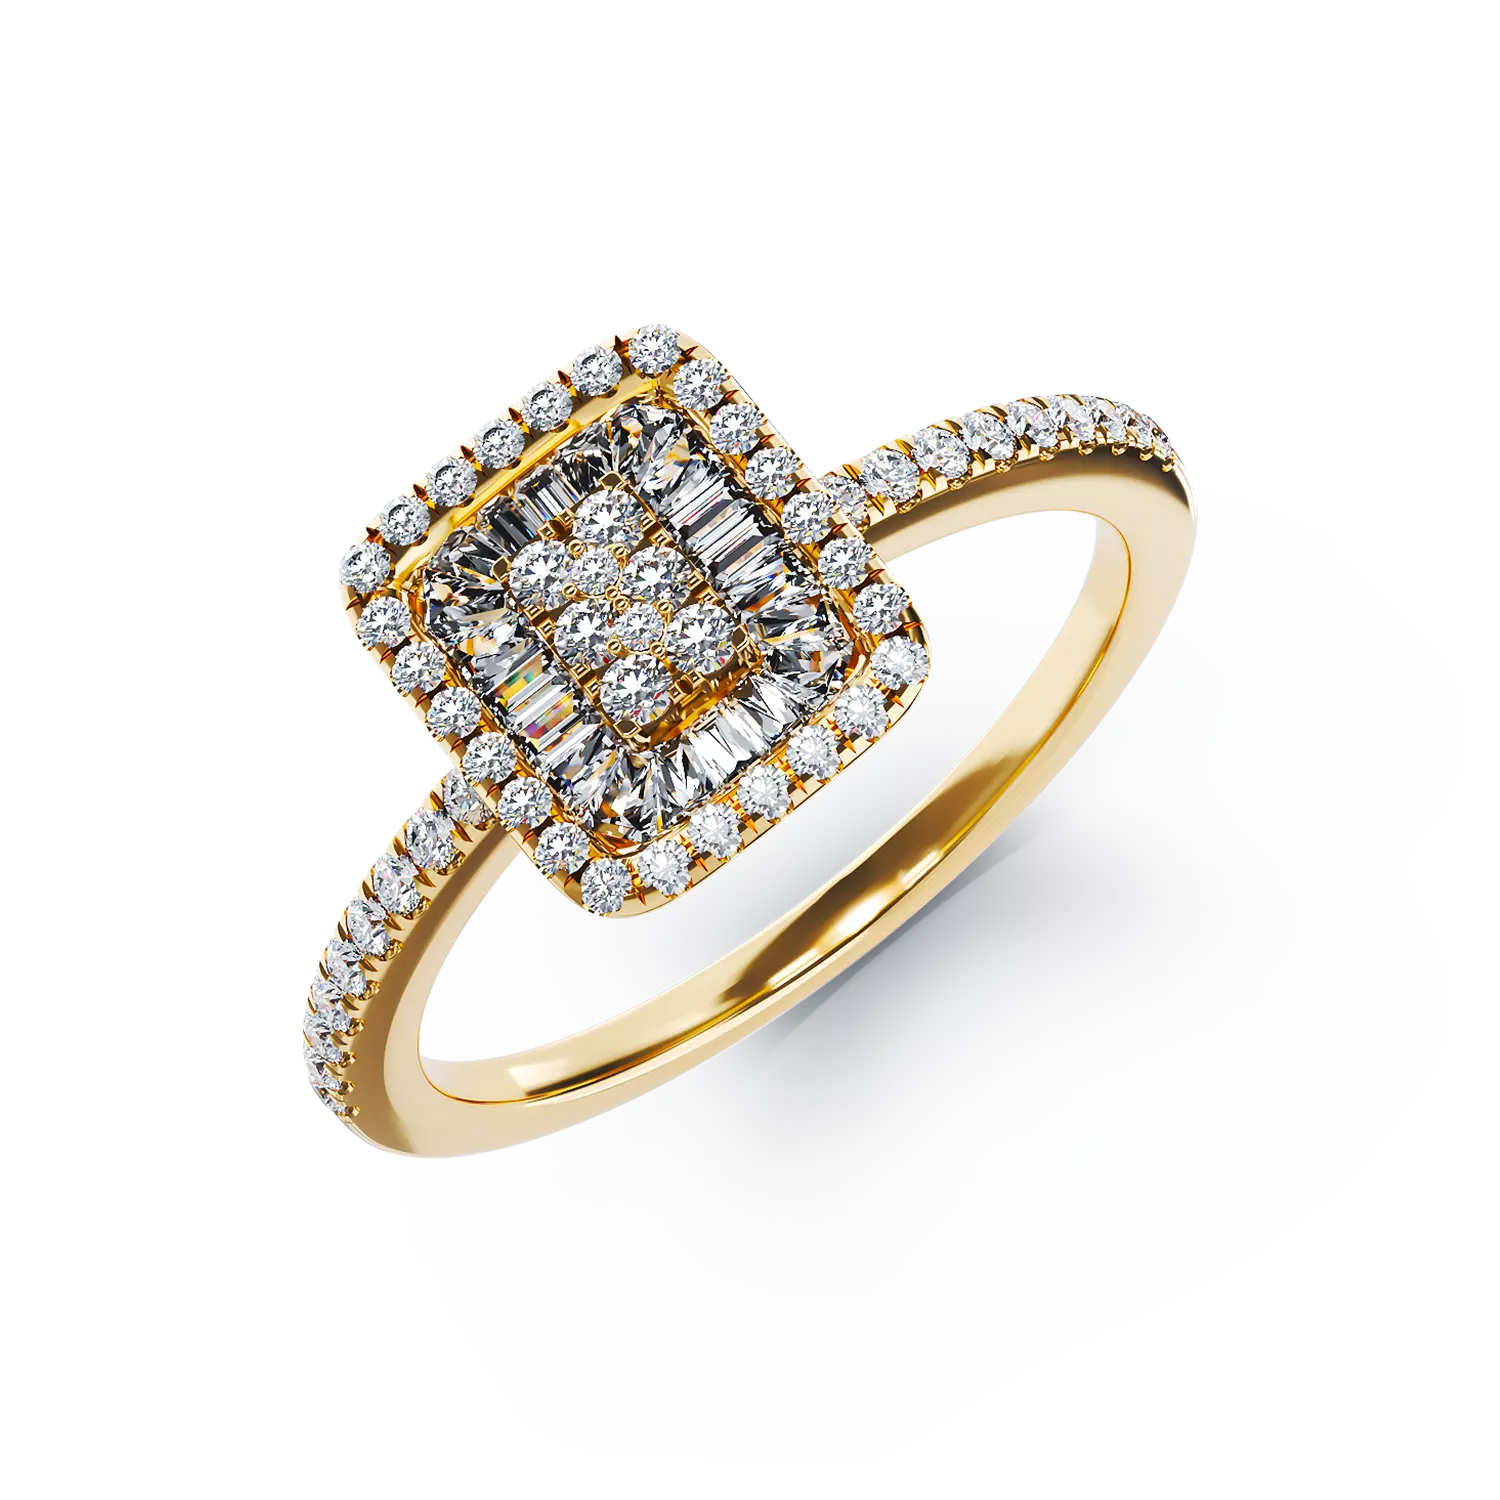 18K yellow gold engagement ring with 0.28ct diamonds